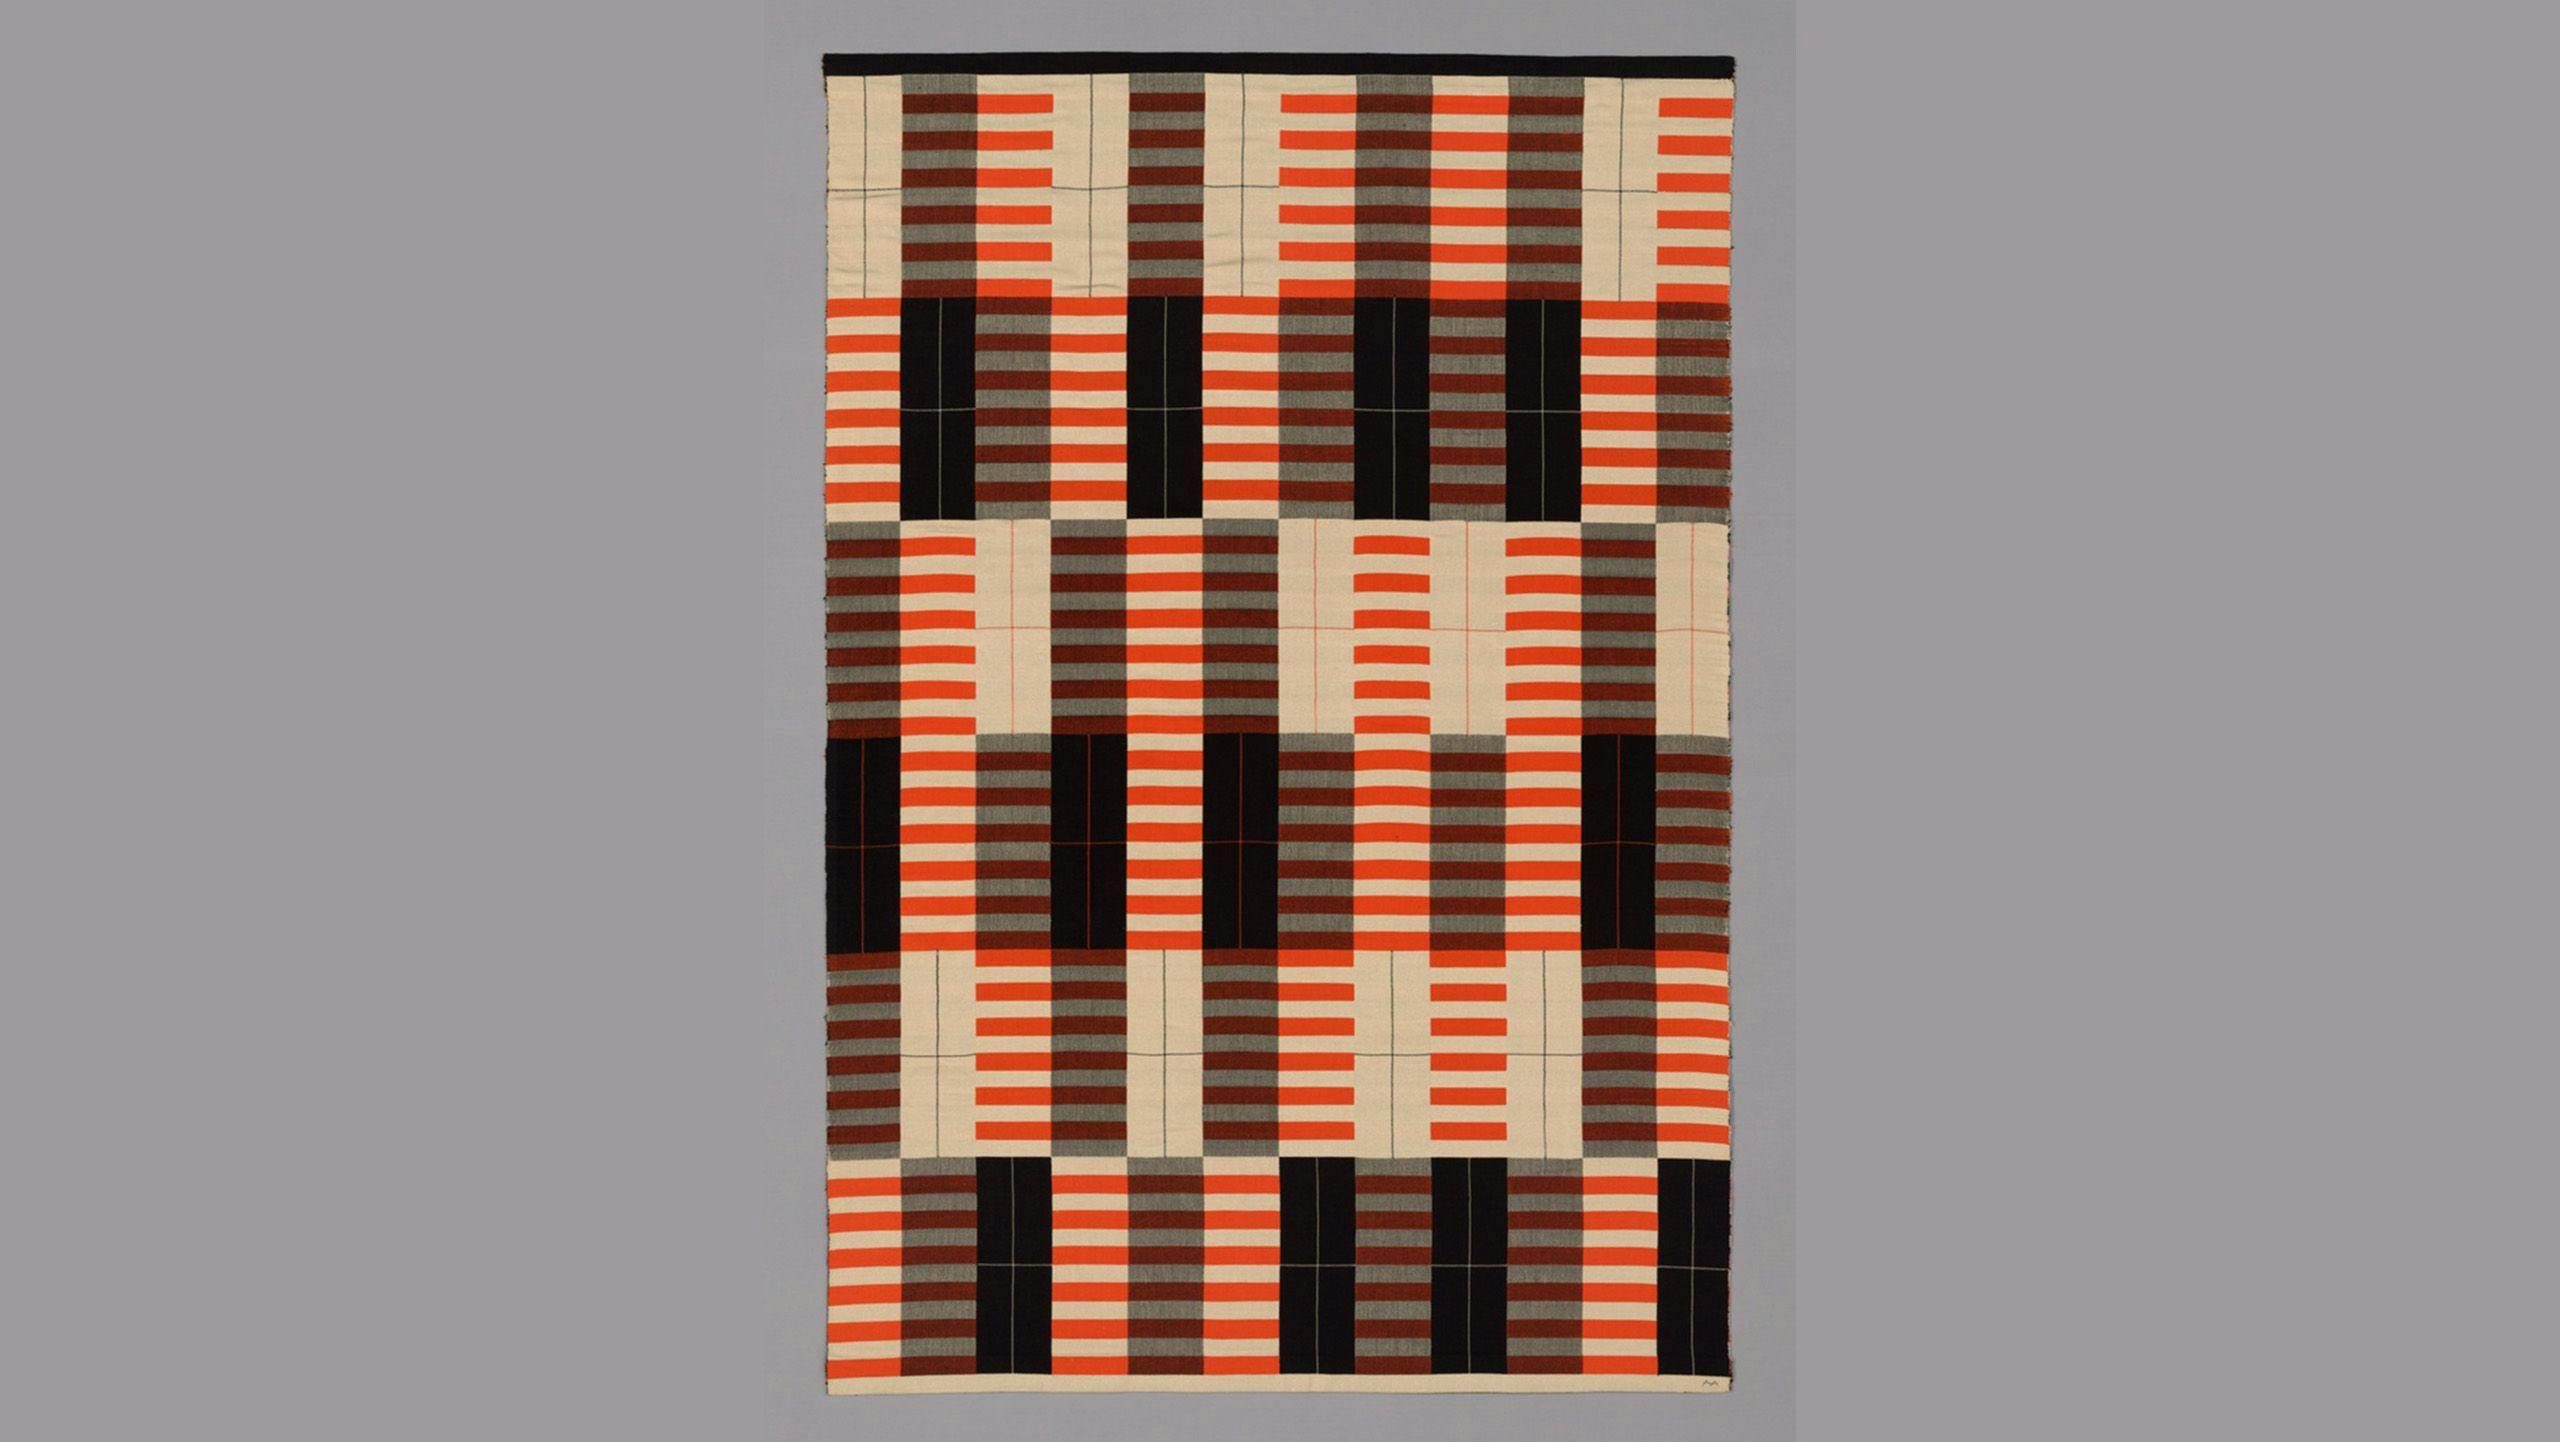 A work by Anni Albers, titled "Black-White-Red," designed 1926/1927, woven 1965.